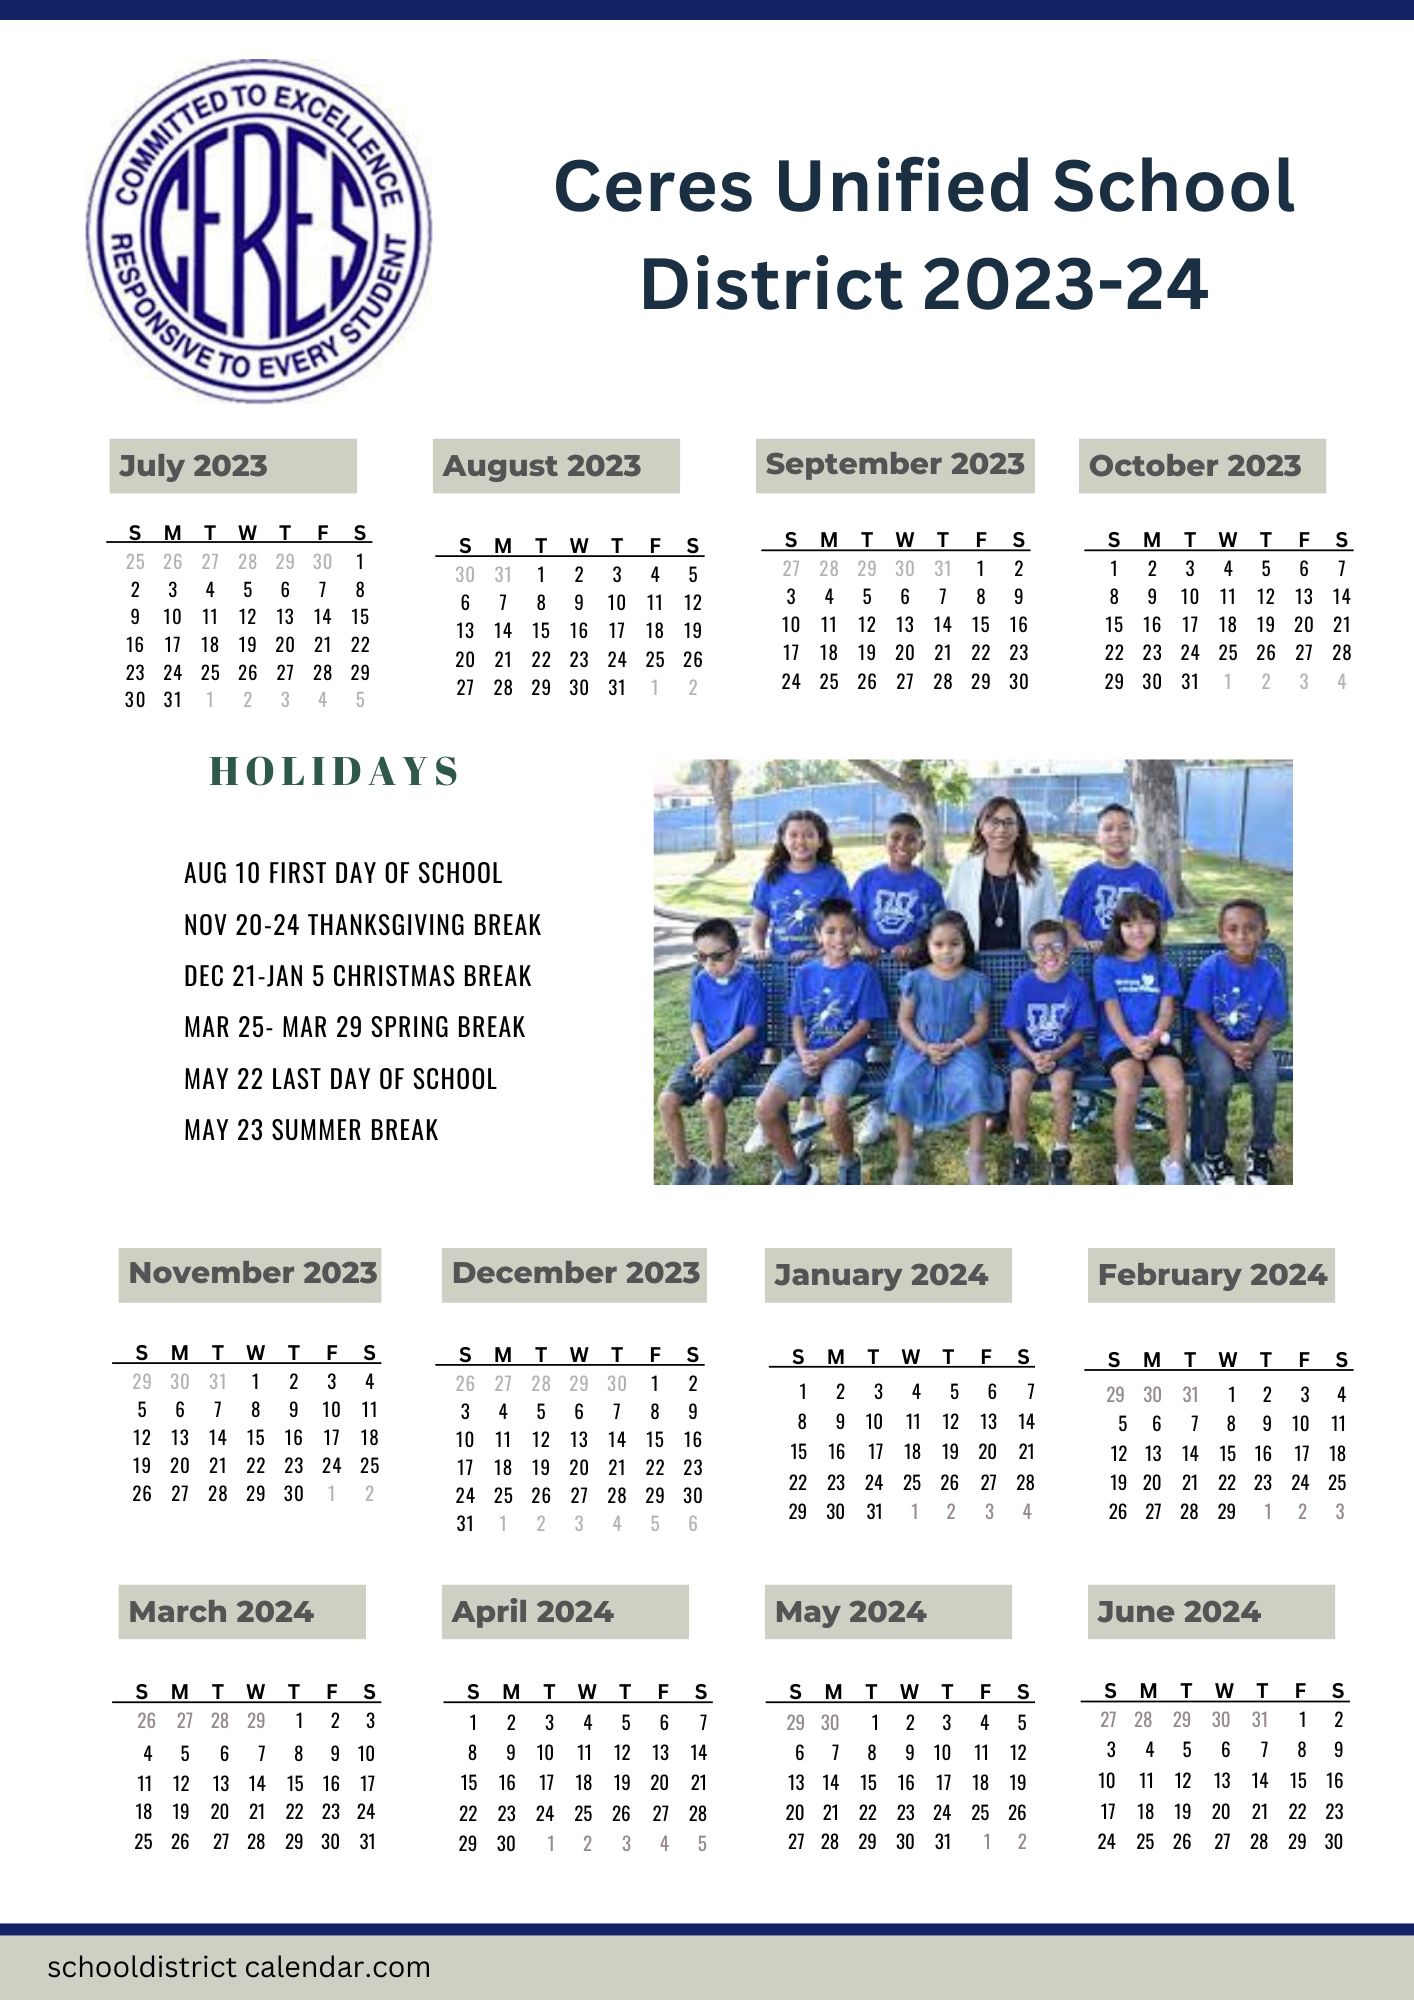 Ceres Unified School District Calendar Holidays 20232024